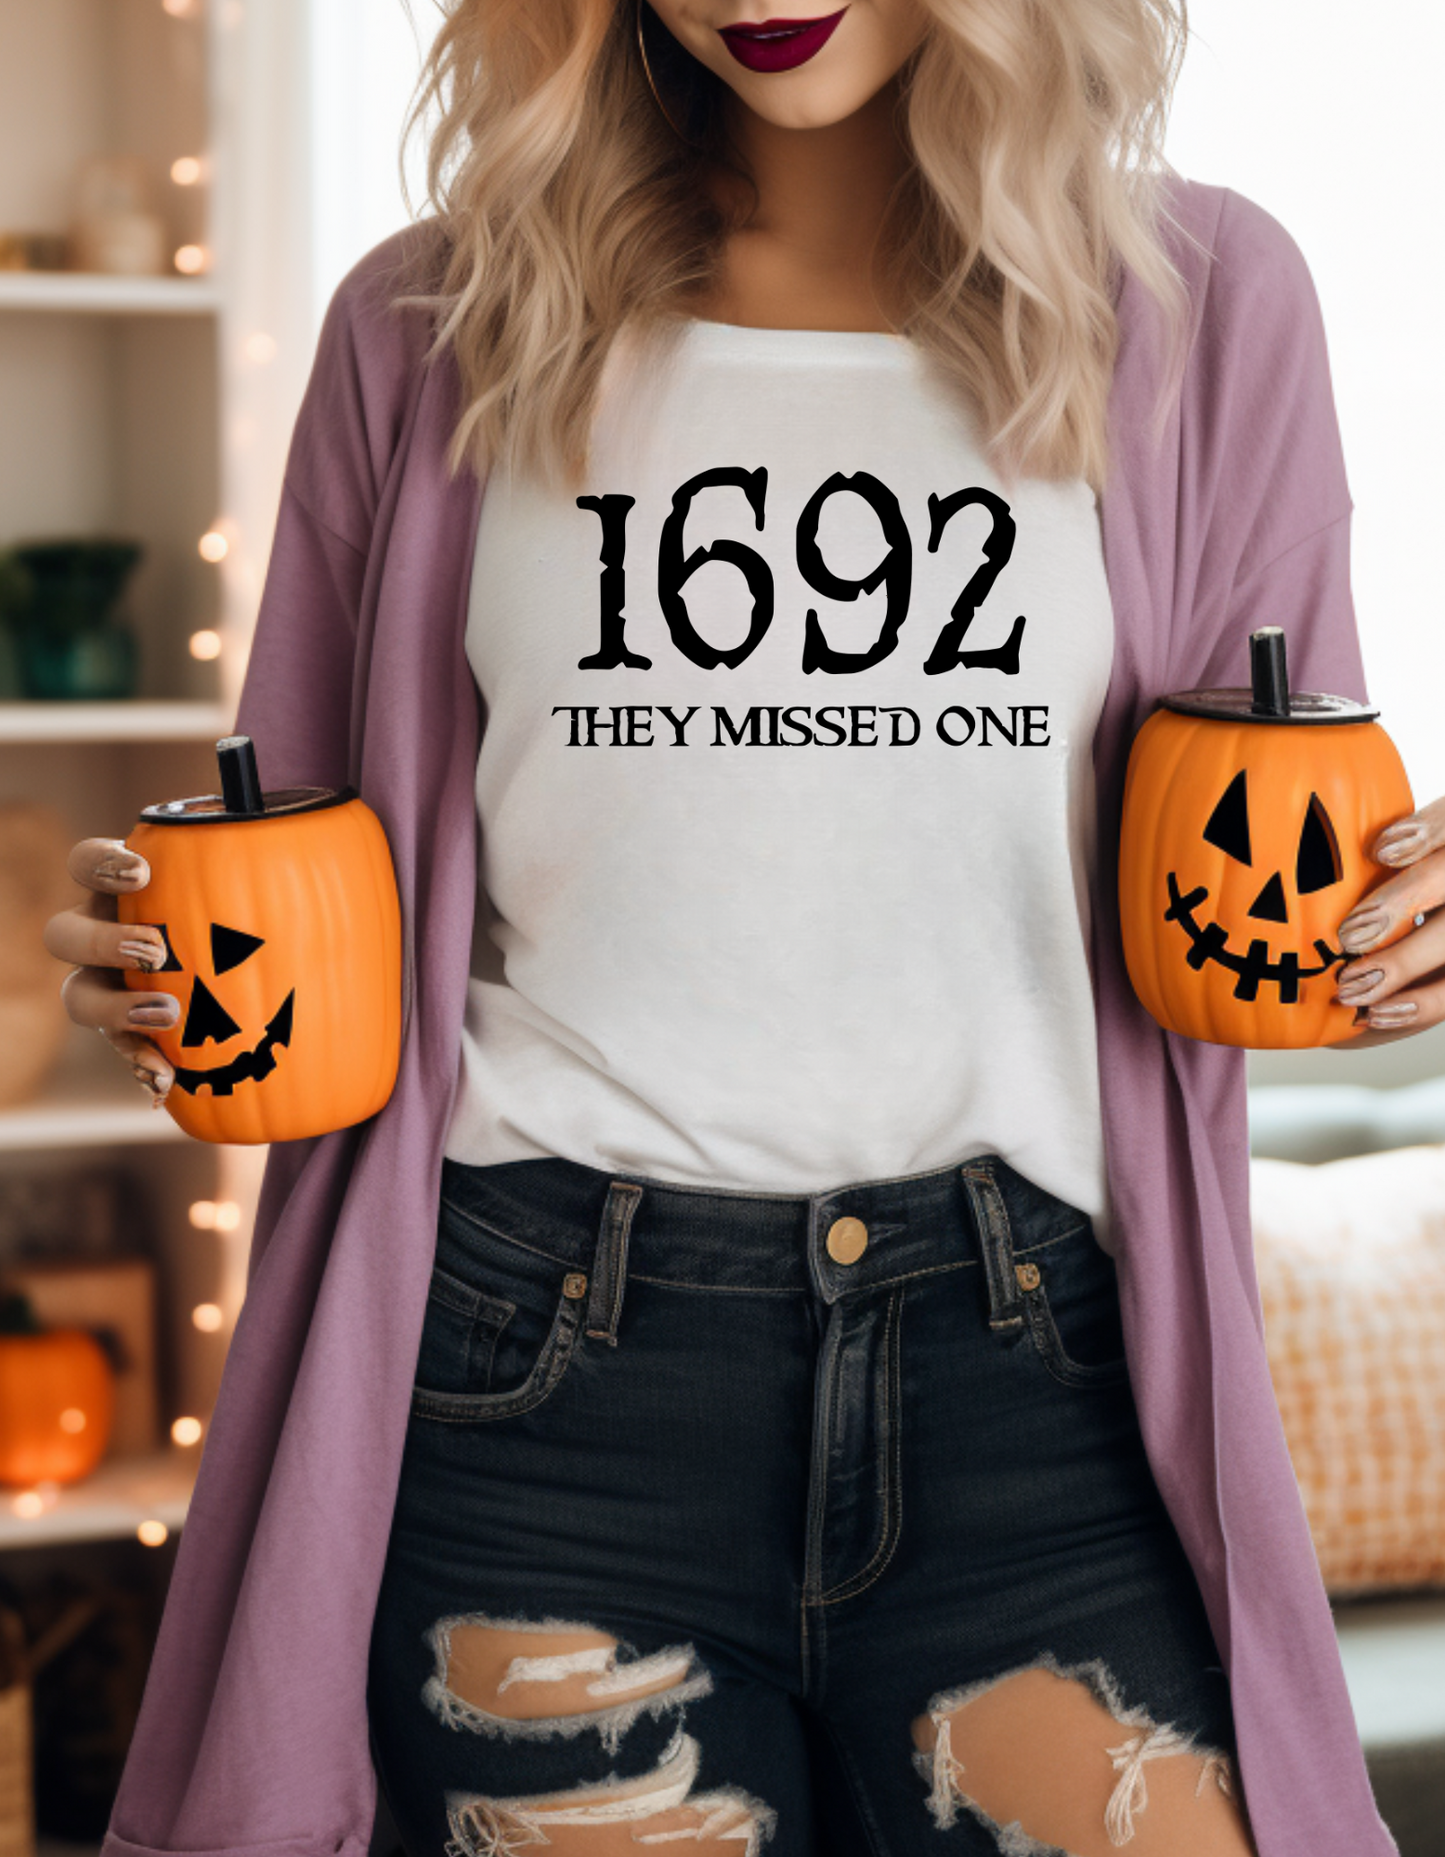 1692 They Missed One 3001C Unisex Jersey Short-Sleeve T-Shirt